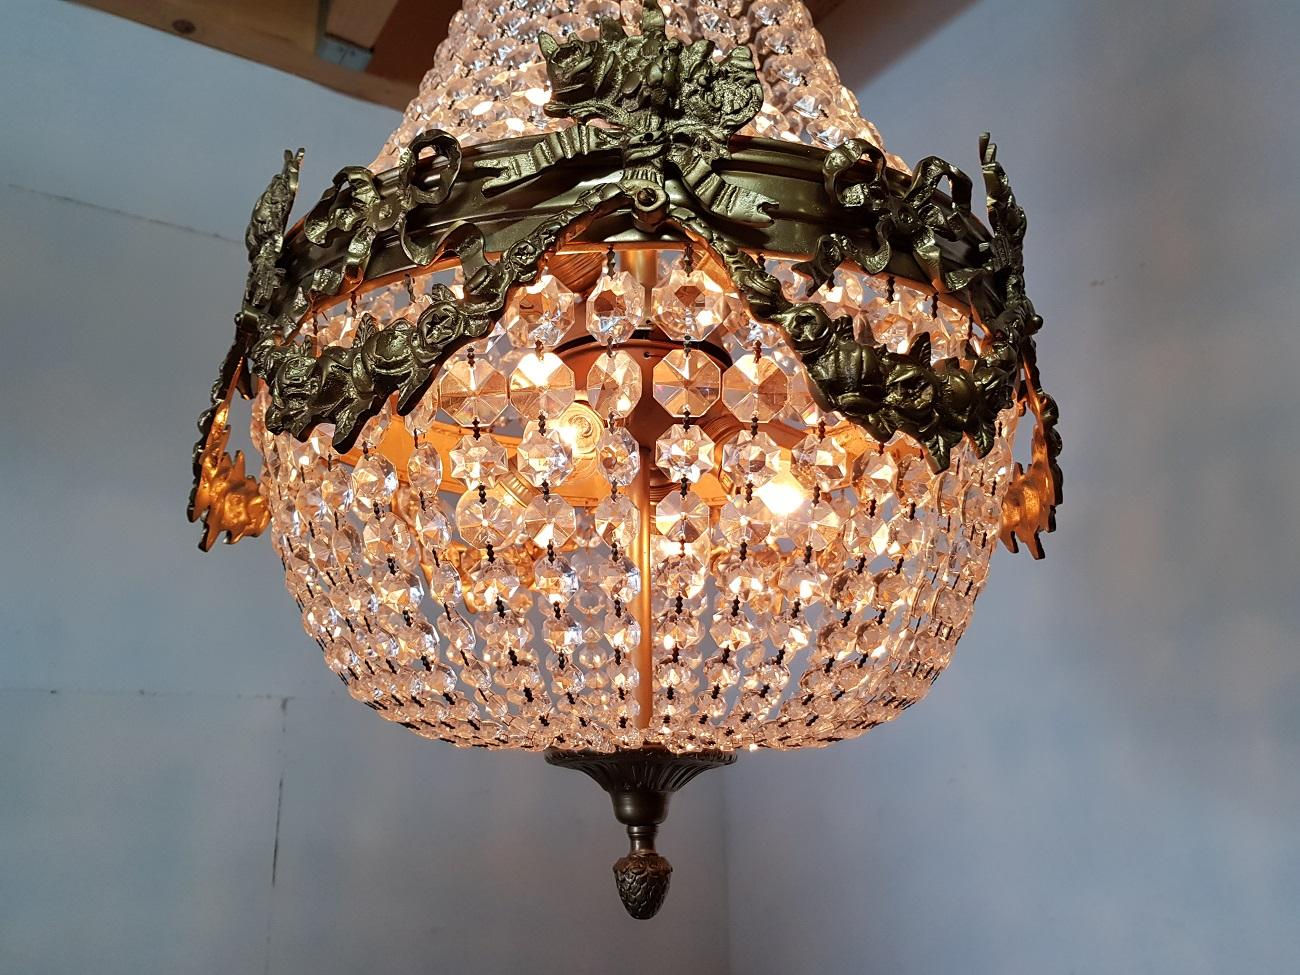 Heavy 8 lights crystal chandelier in Louis XVI style with gold colored metal frame decorated with garlands and bows in very good condition, late 20th century.

The measurements are,
Depth 50 cm/ 19.6 inch.
Width 50 cm/ 19.6 inch.
Height 93 cm/